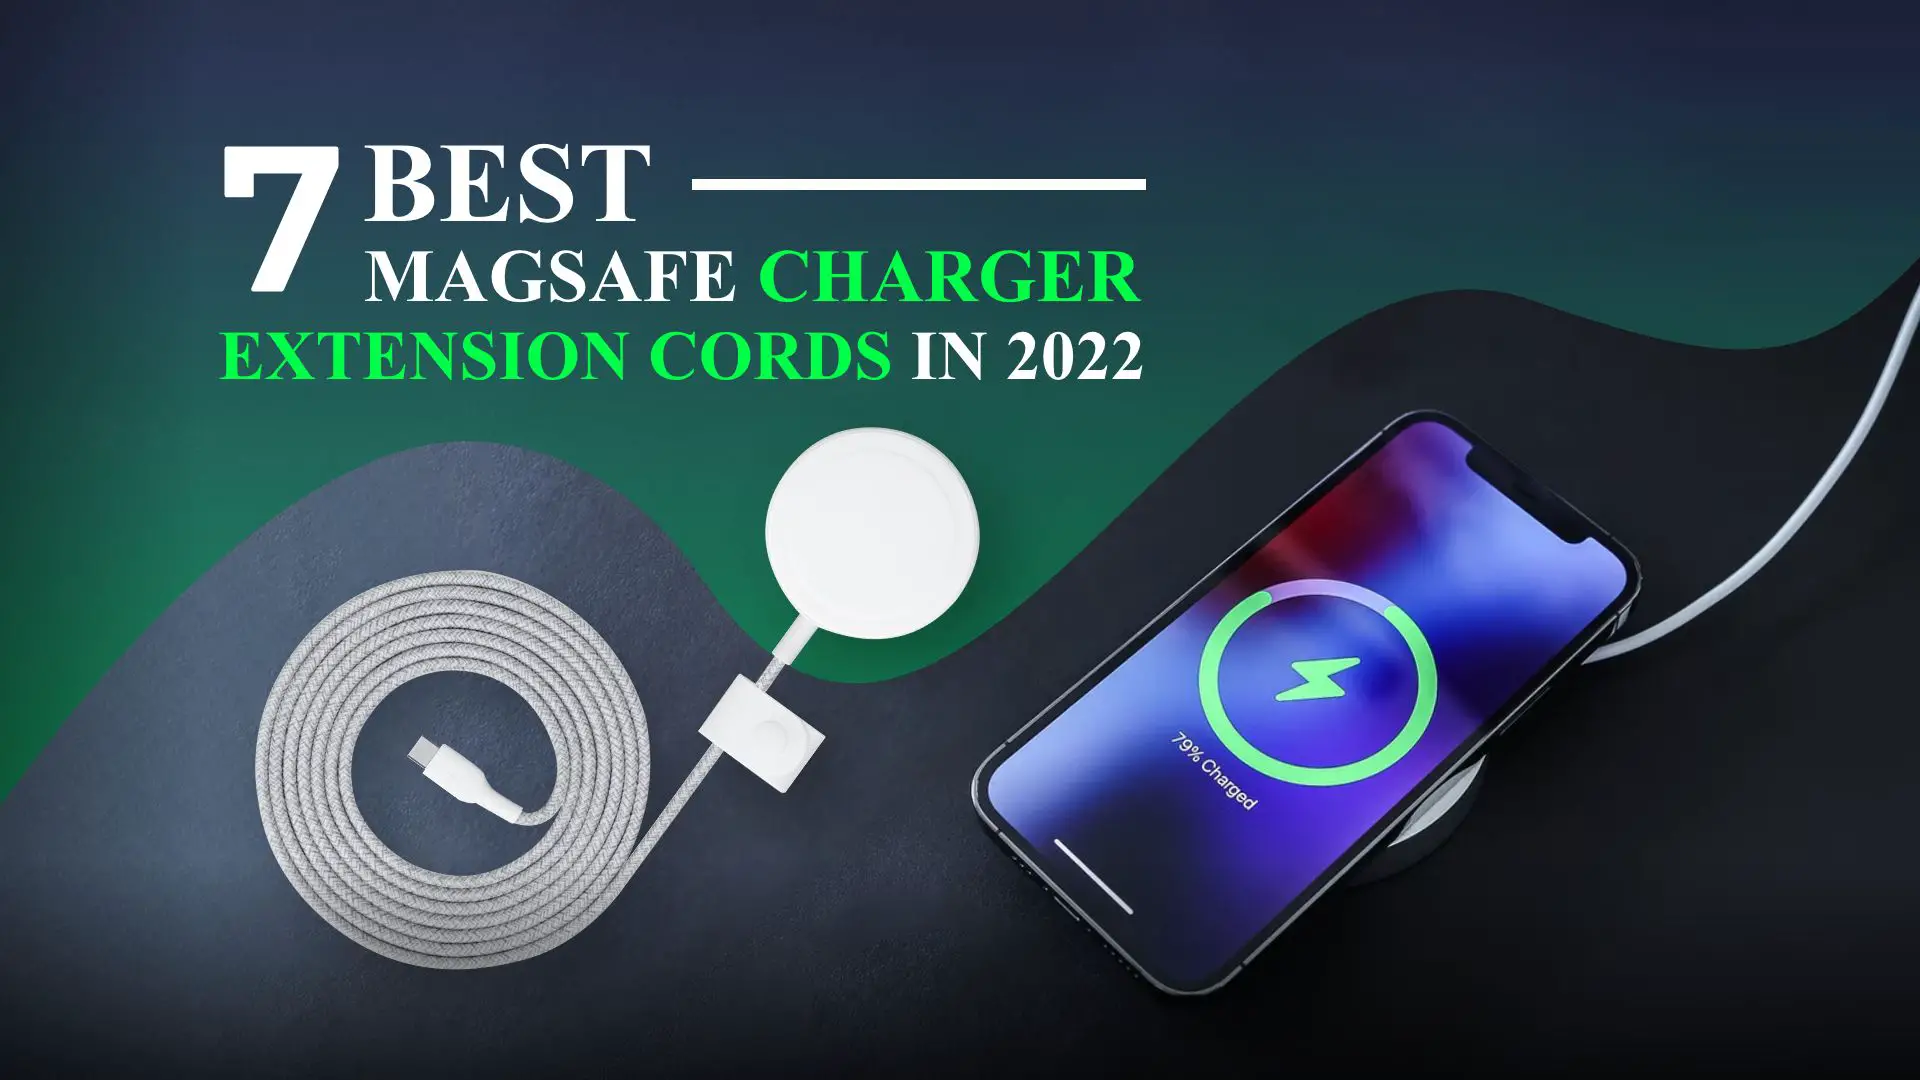 Best MagSafe Charger Extension Cords in 2022